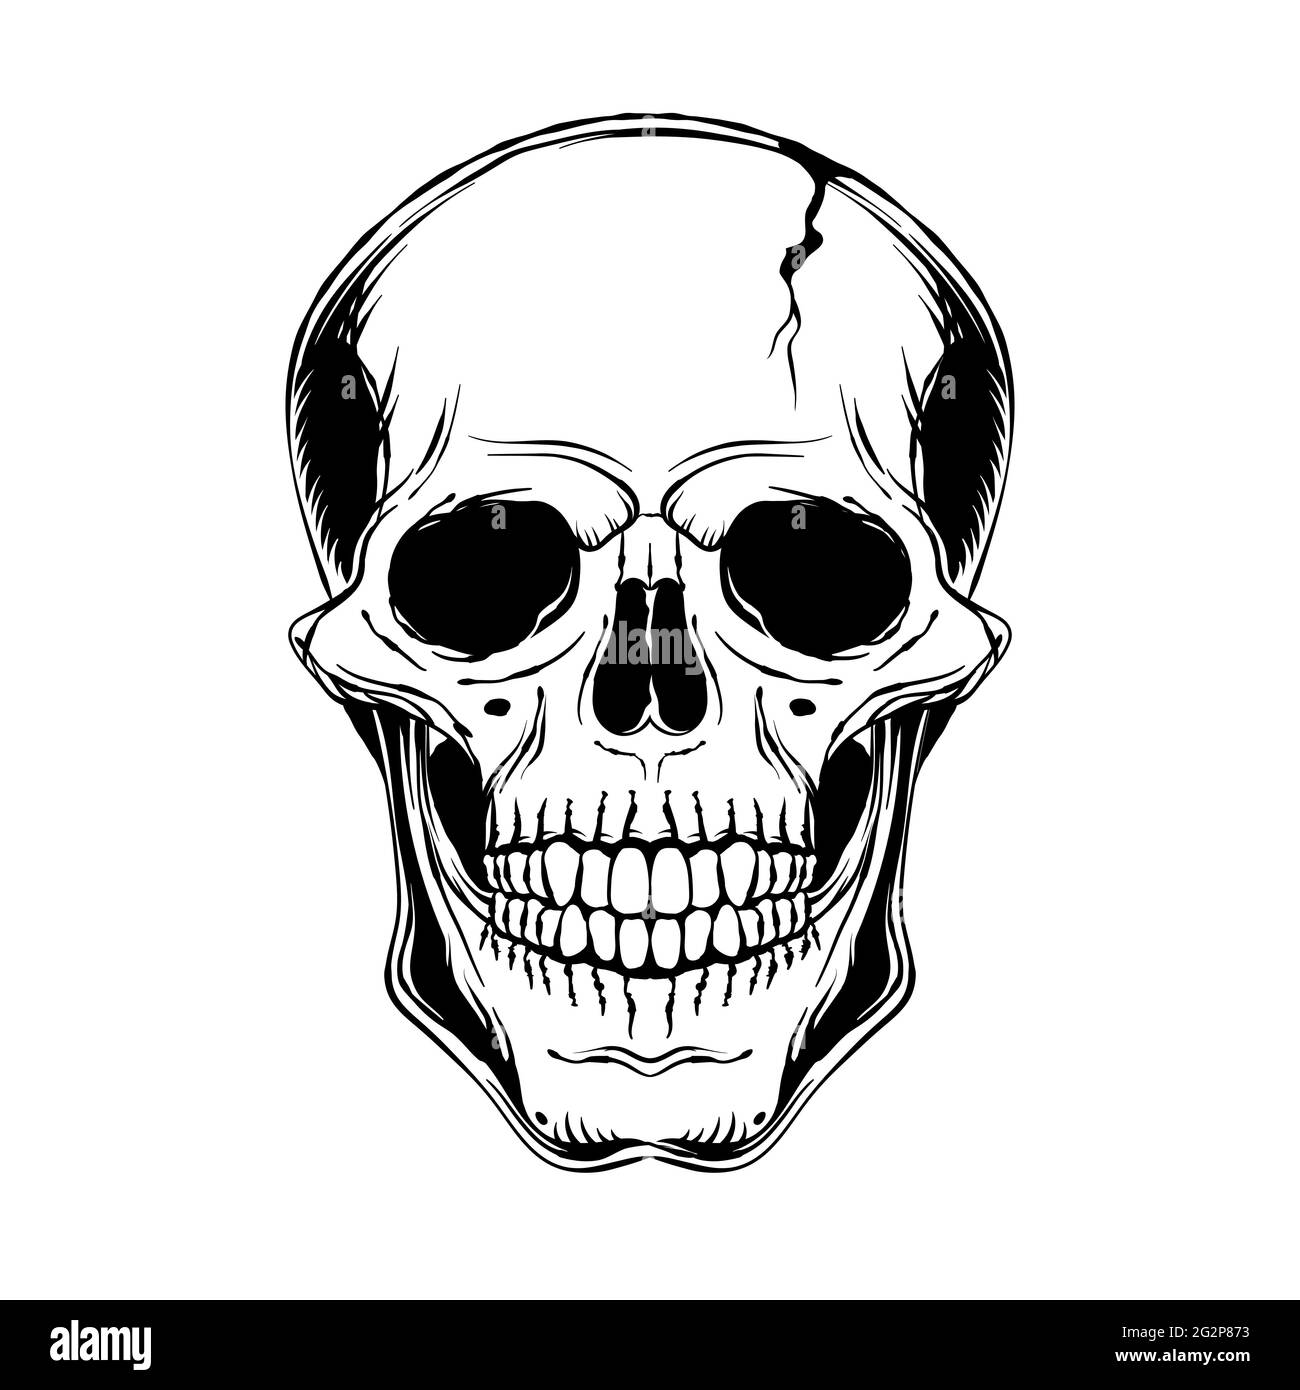 Human skull. Front view. Vector black and white hand drawn illustration. Stock Vector